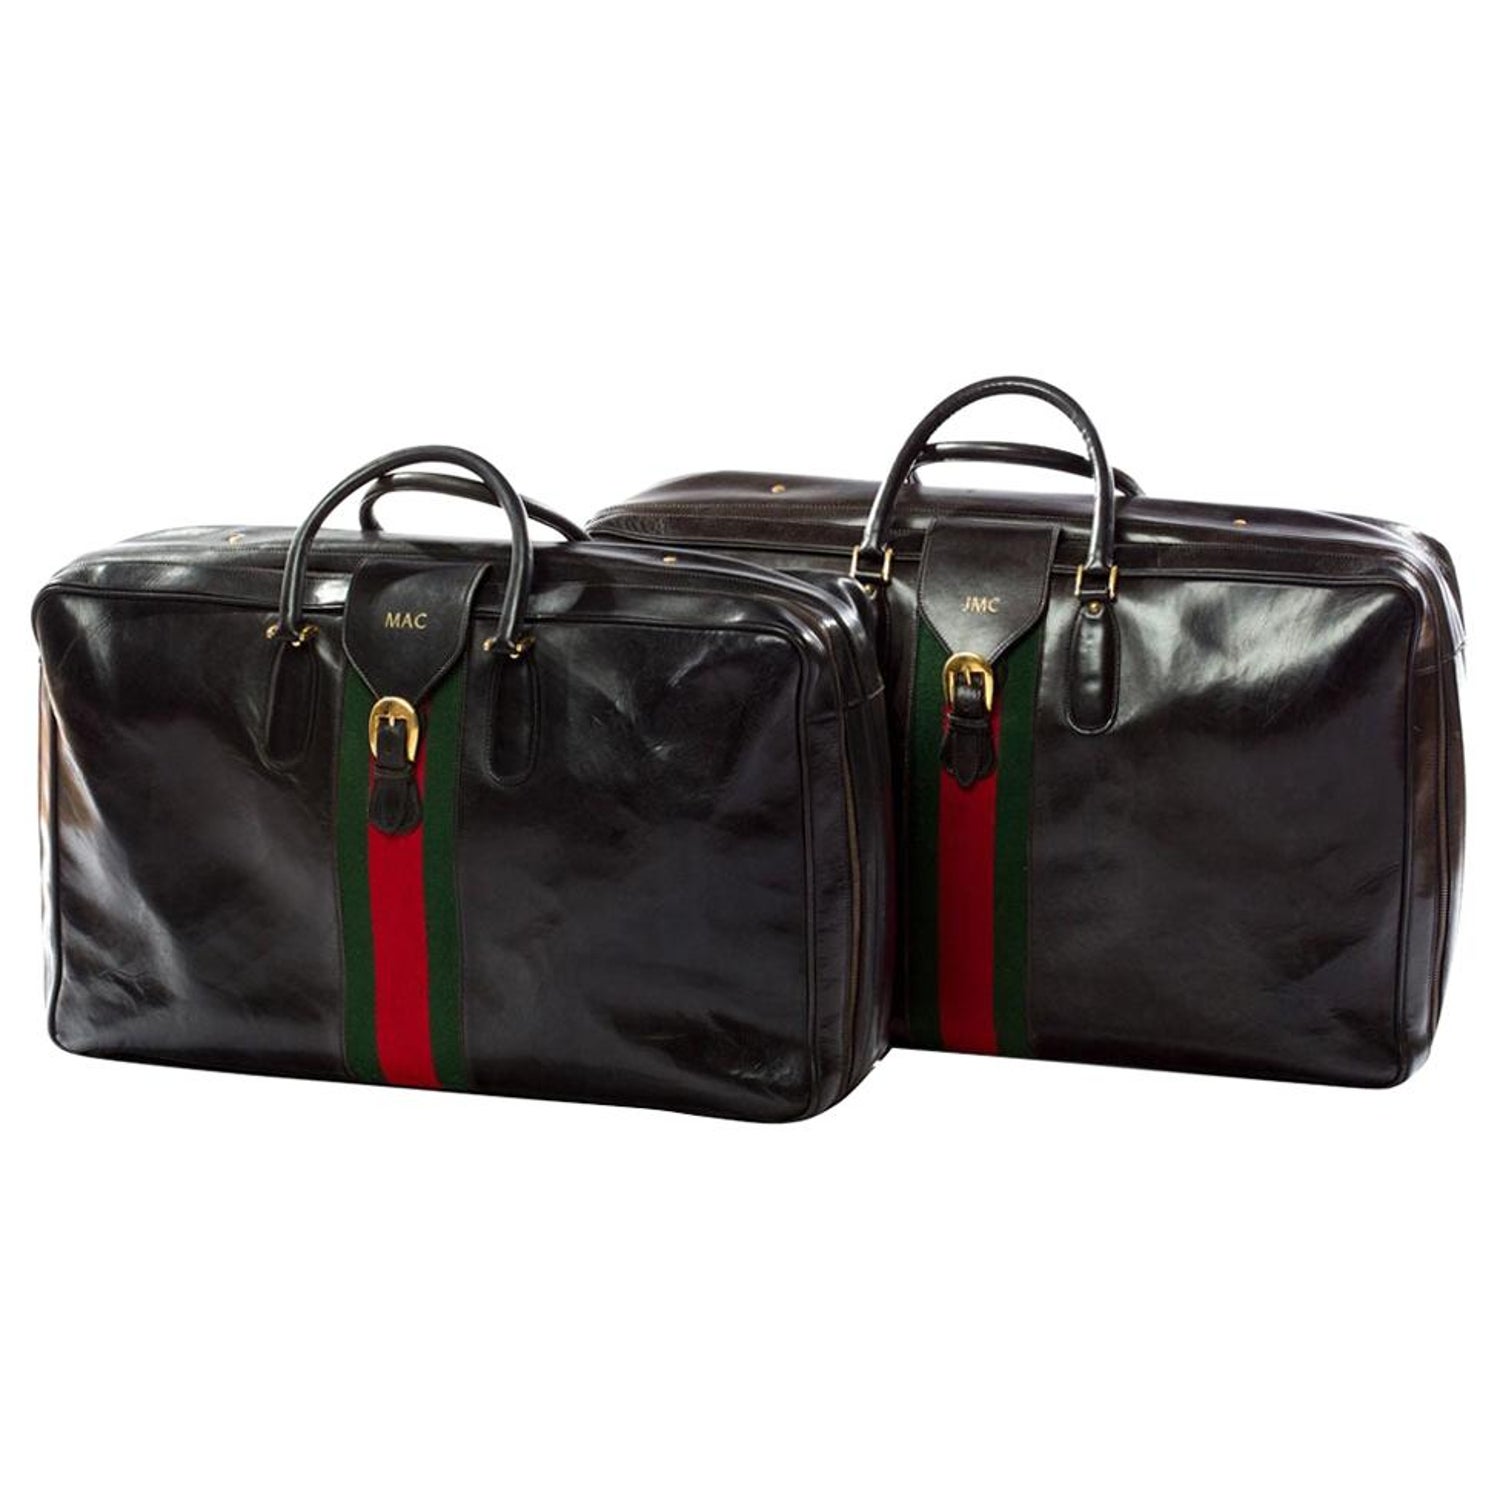 Gucci Luggage Set - For Sale on 1stDibs